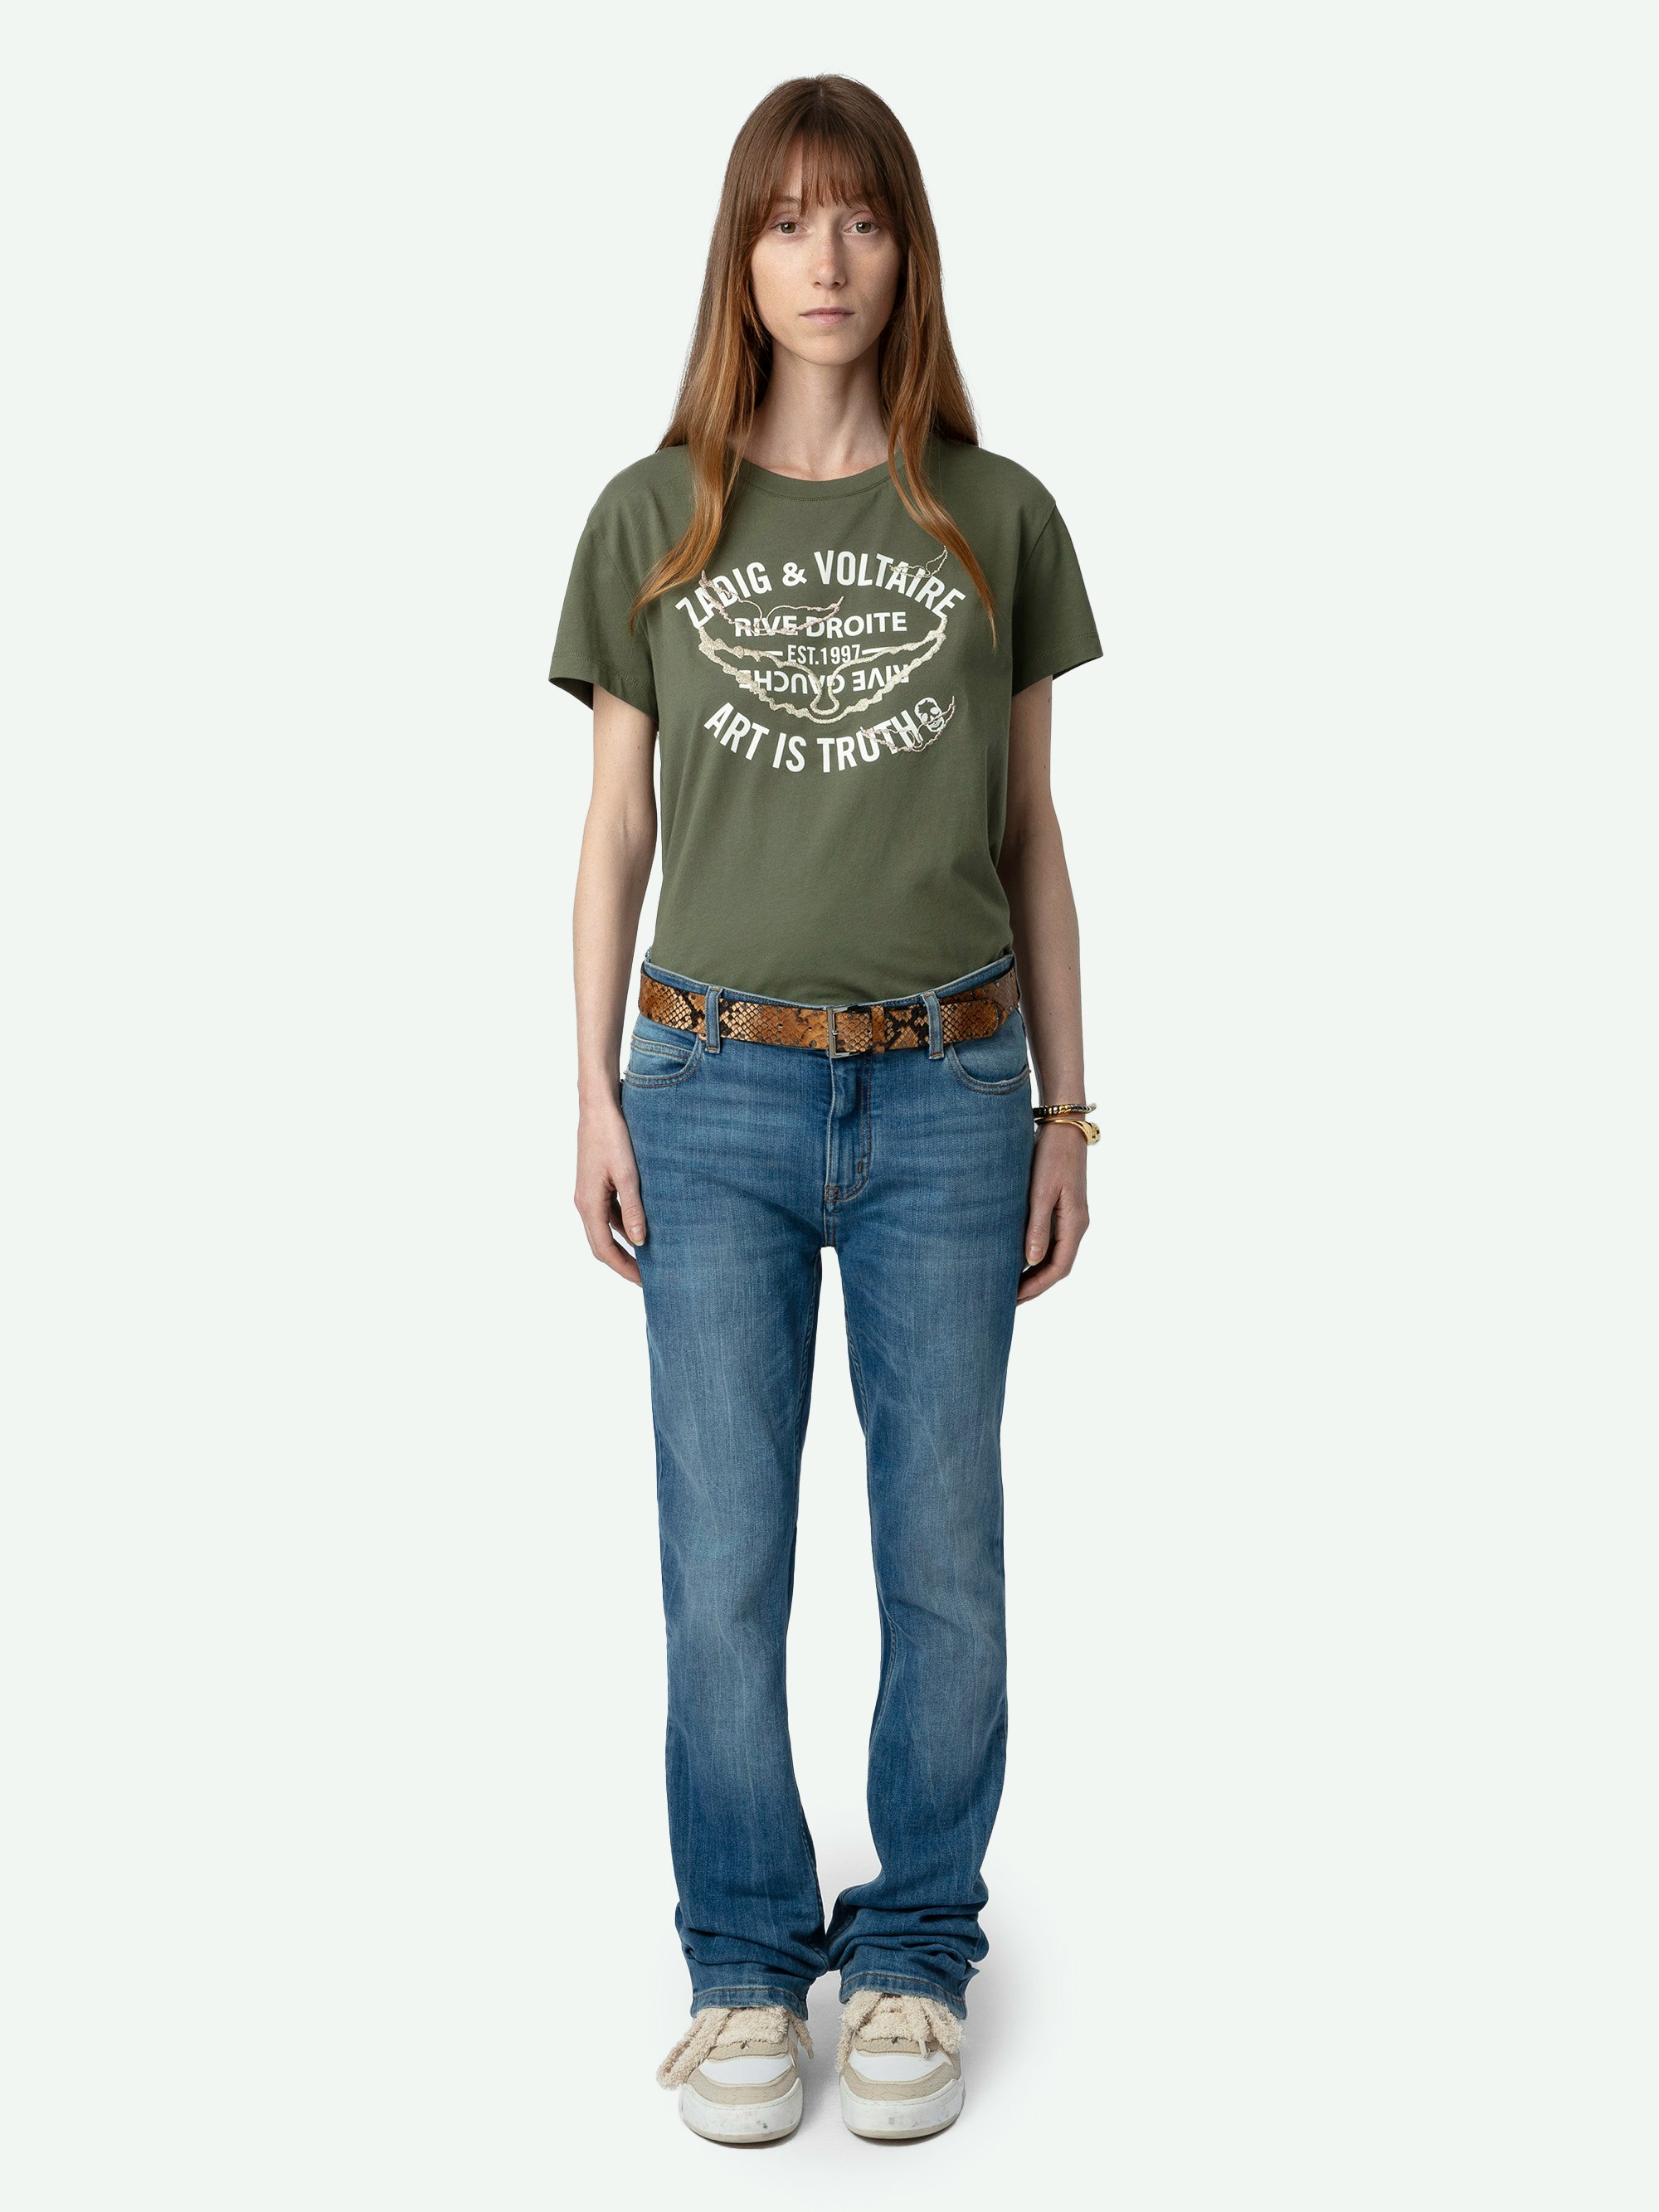 Walk Wings Insignia T-shirt - Short-sleeved khaki organic cotton T-shirt with insignia print and metallic wings embroidered on the front.